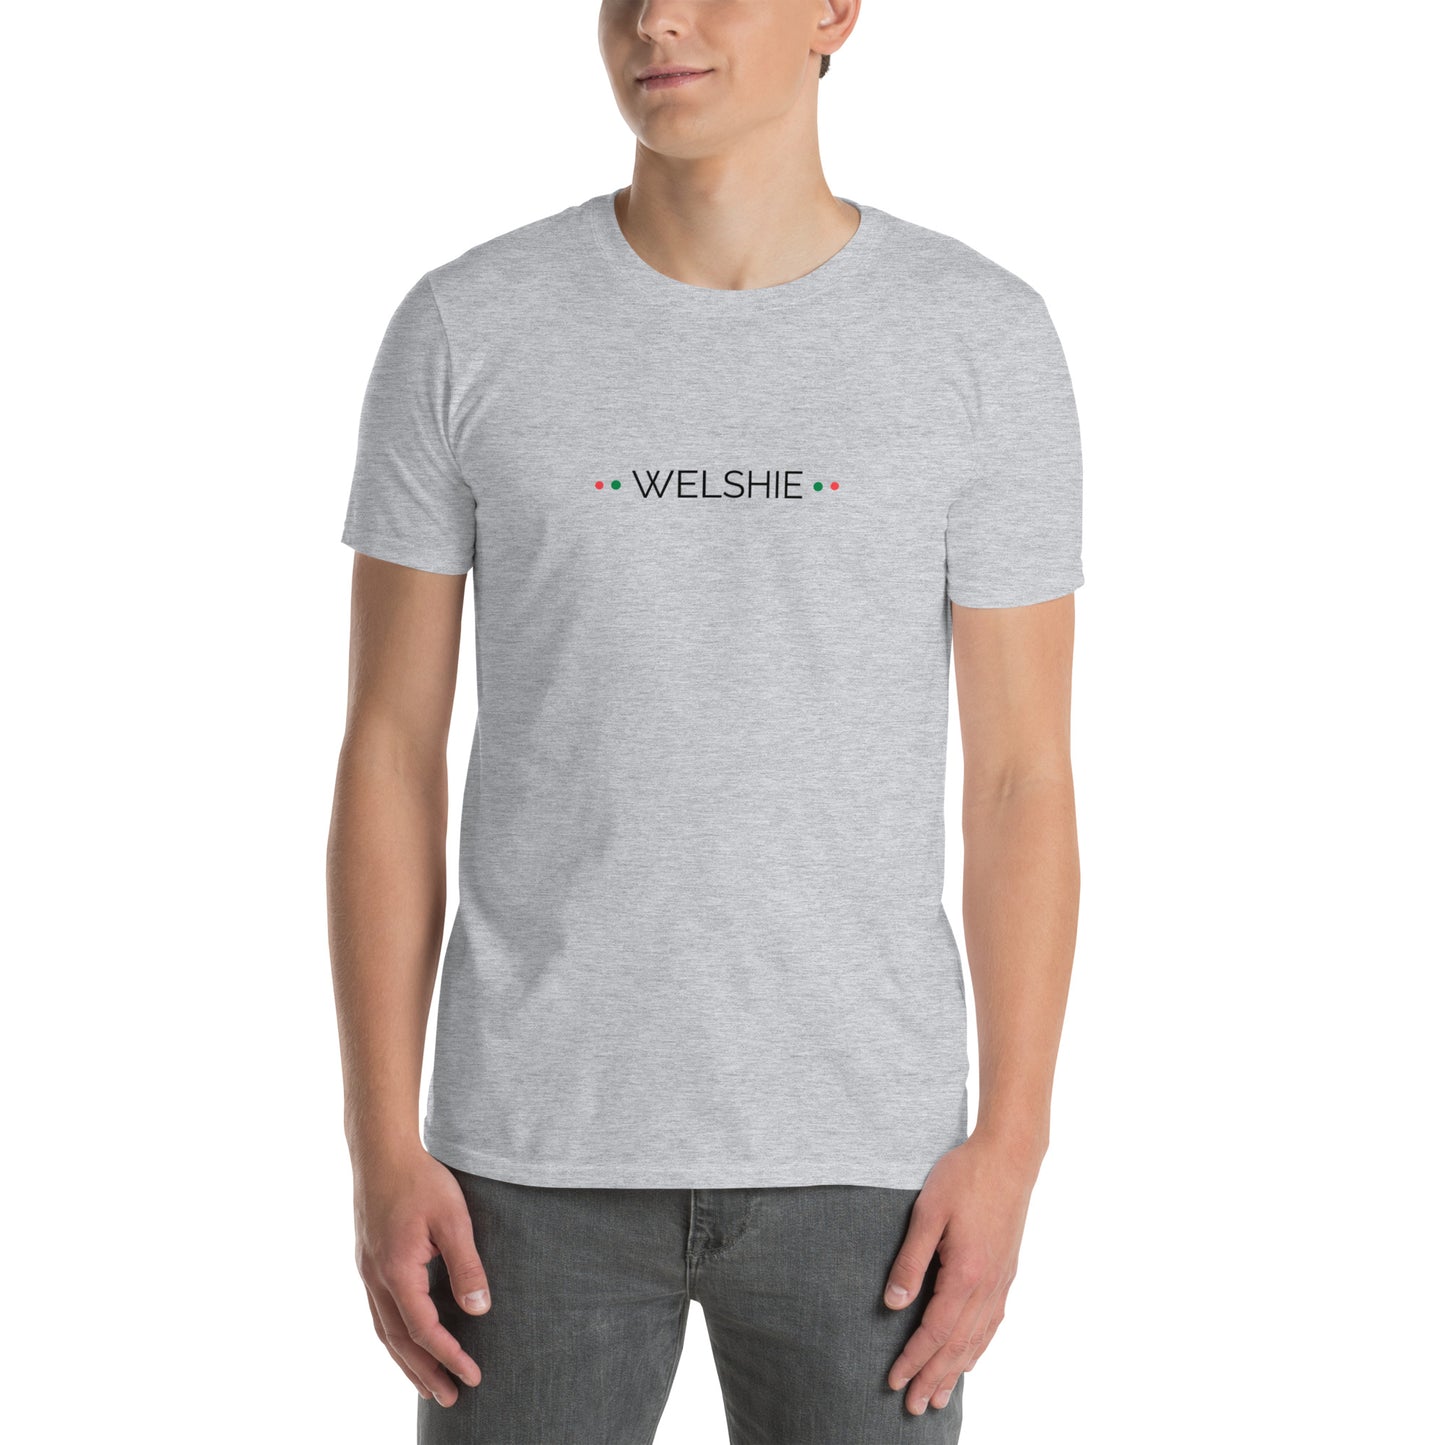 Welshie Welsh Connection T-Shirt